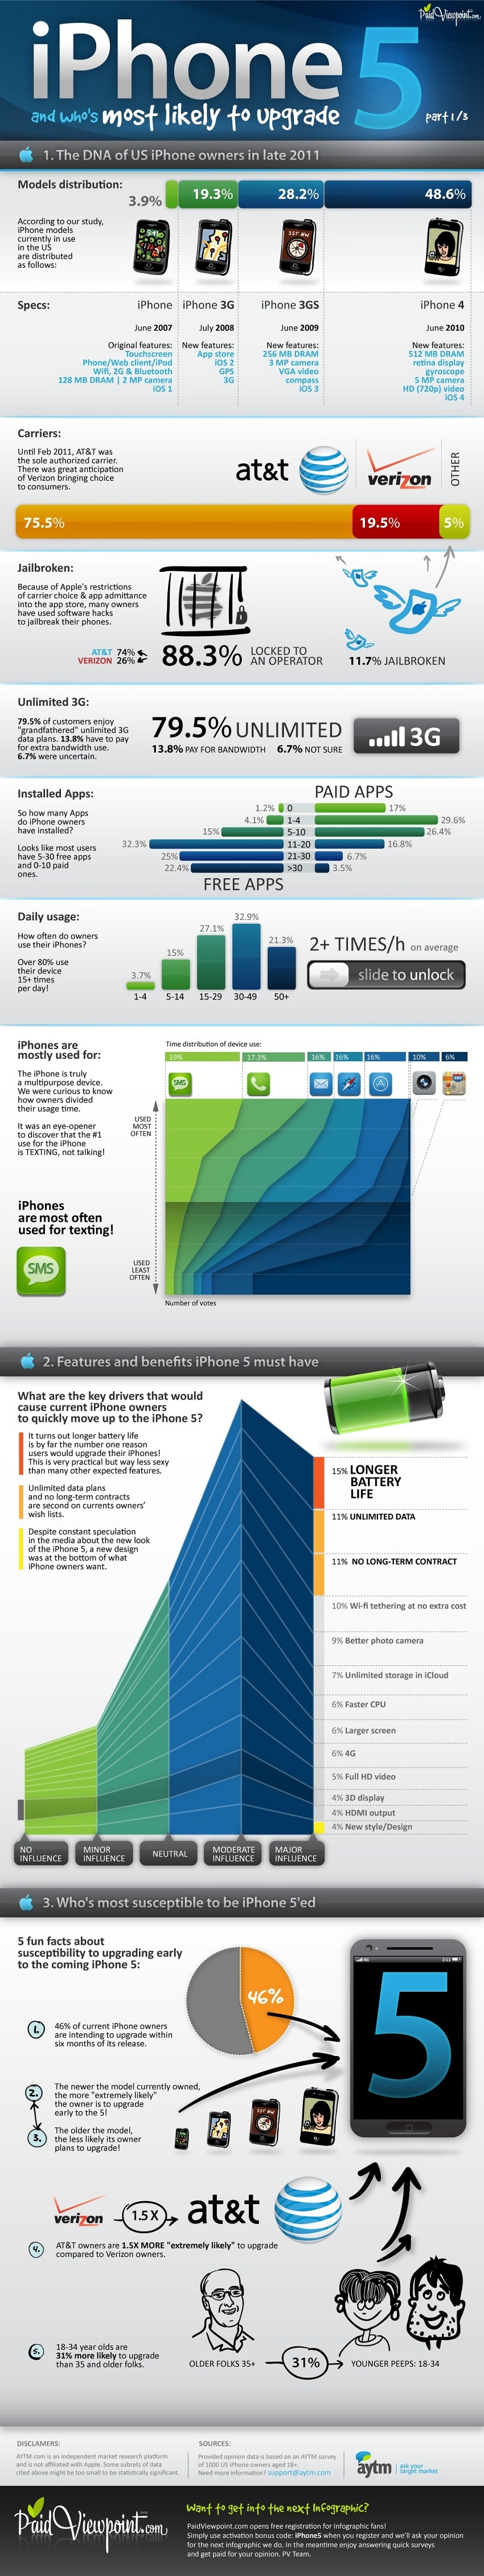 Who’s Most Likely To Upgrade To The iPhone 5 [Infographic]